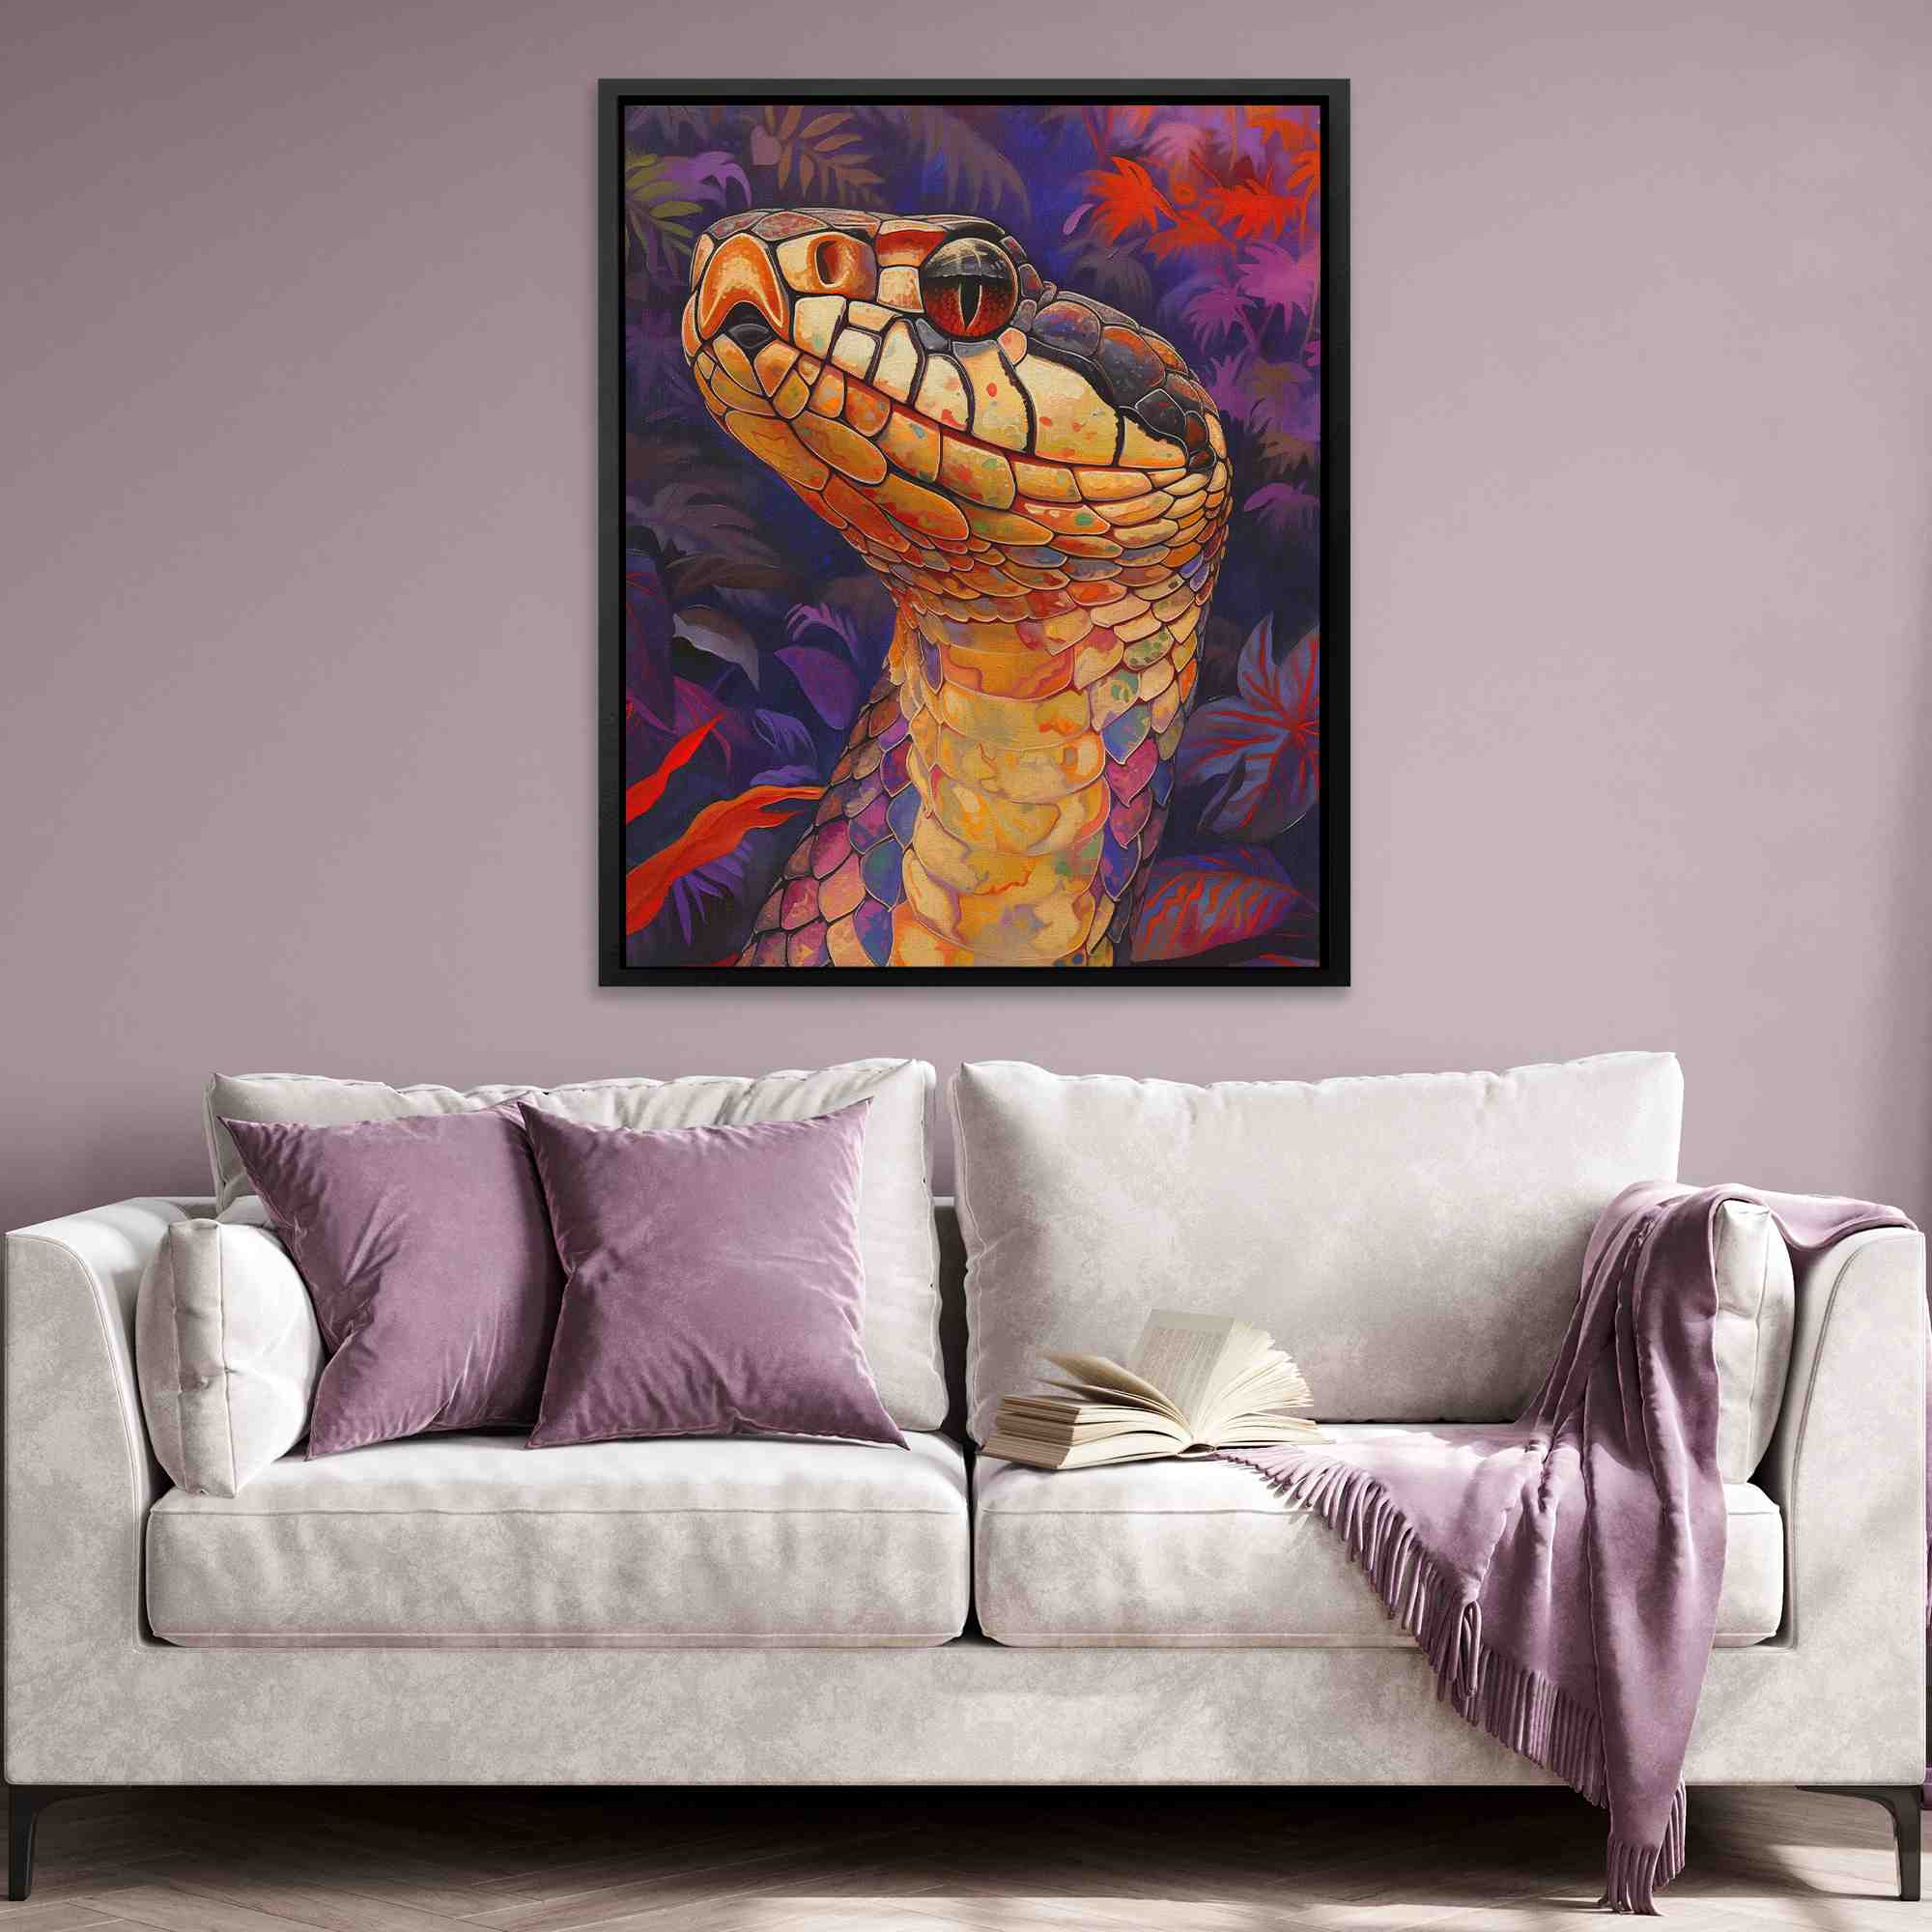 a painting of a snake on a wall